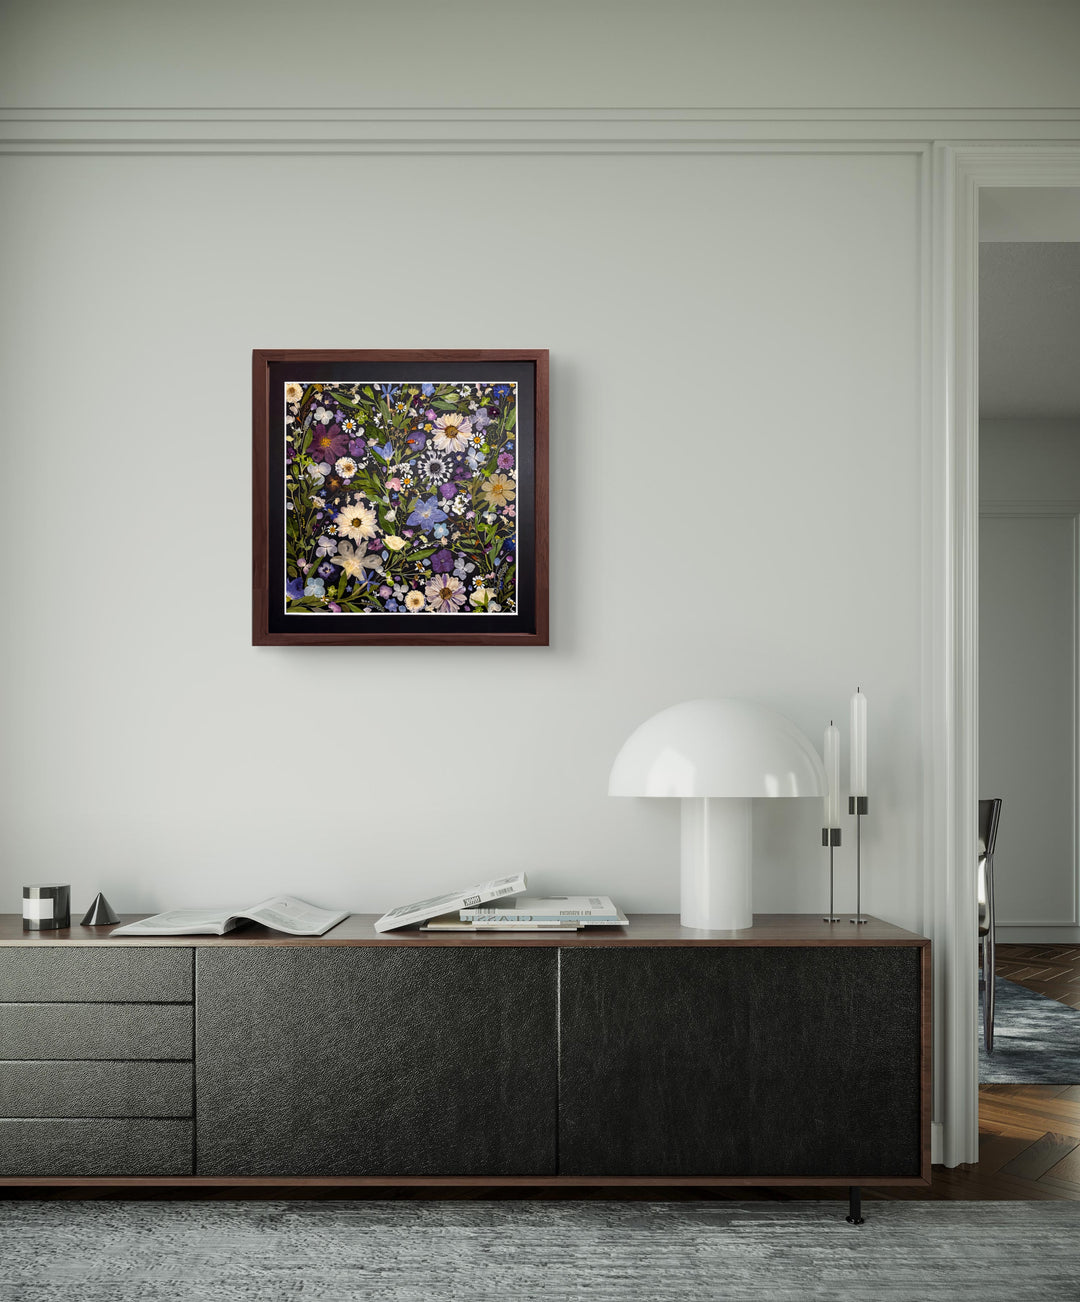 black background pressed flower frame art with flower petals hanging on the living room wall